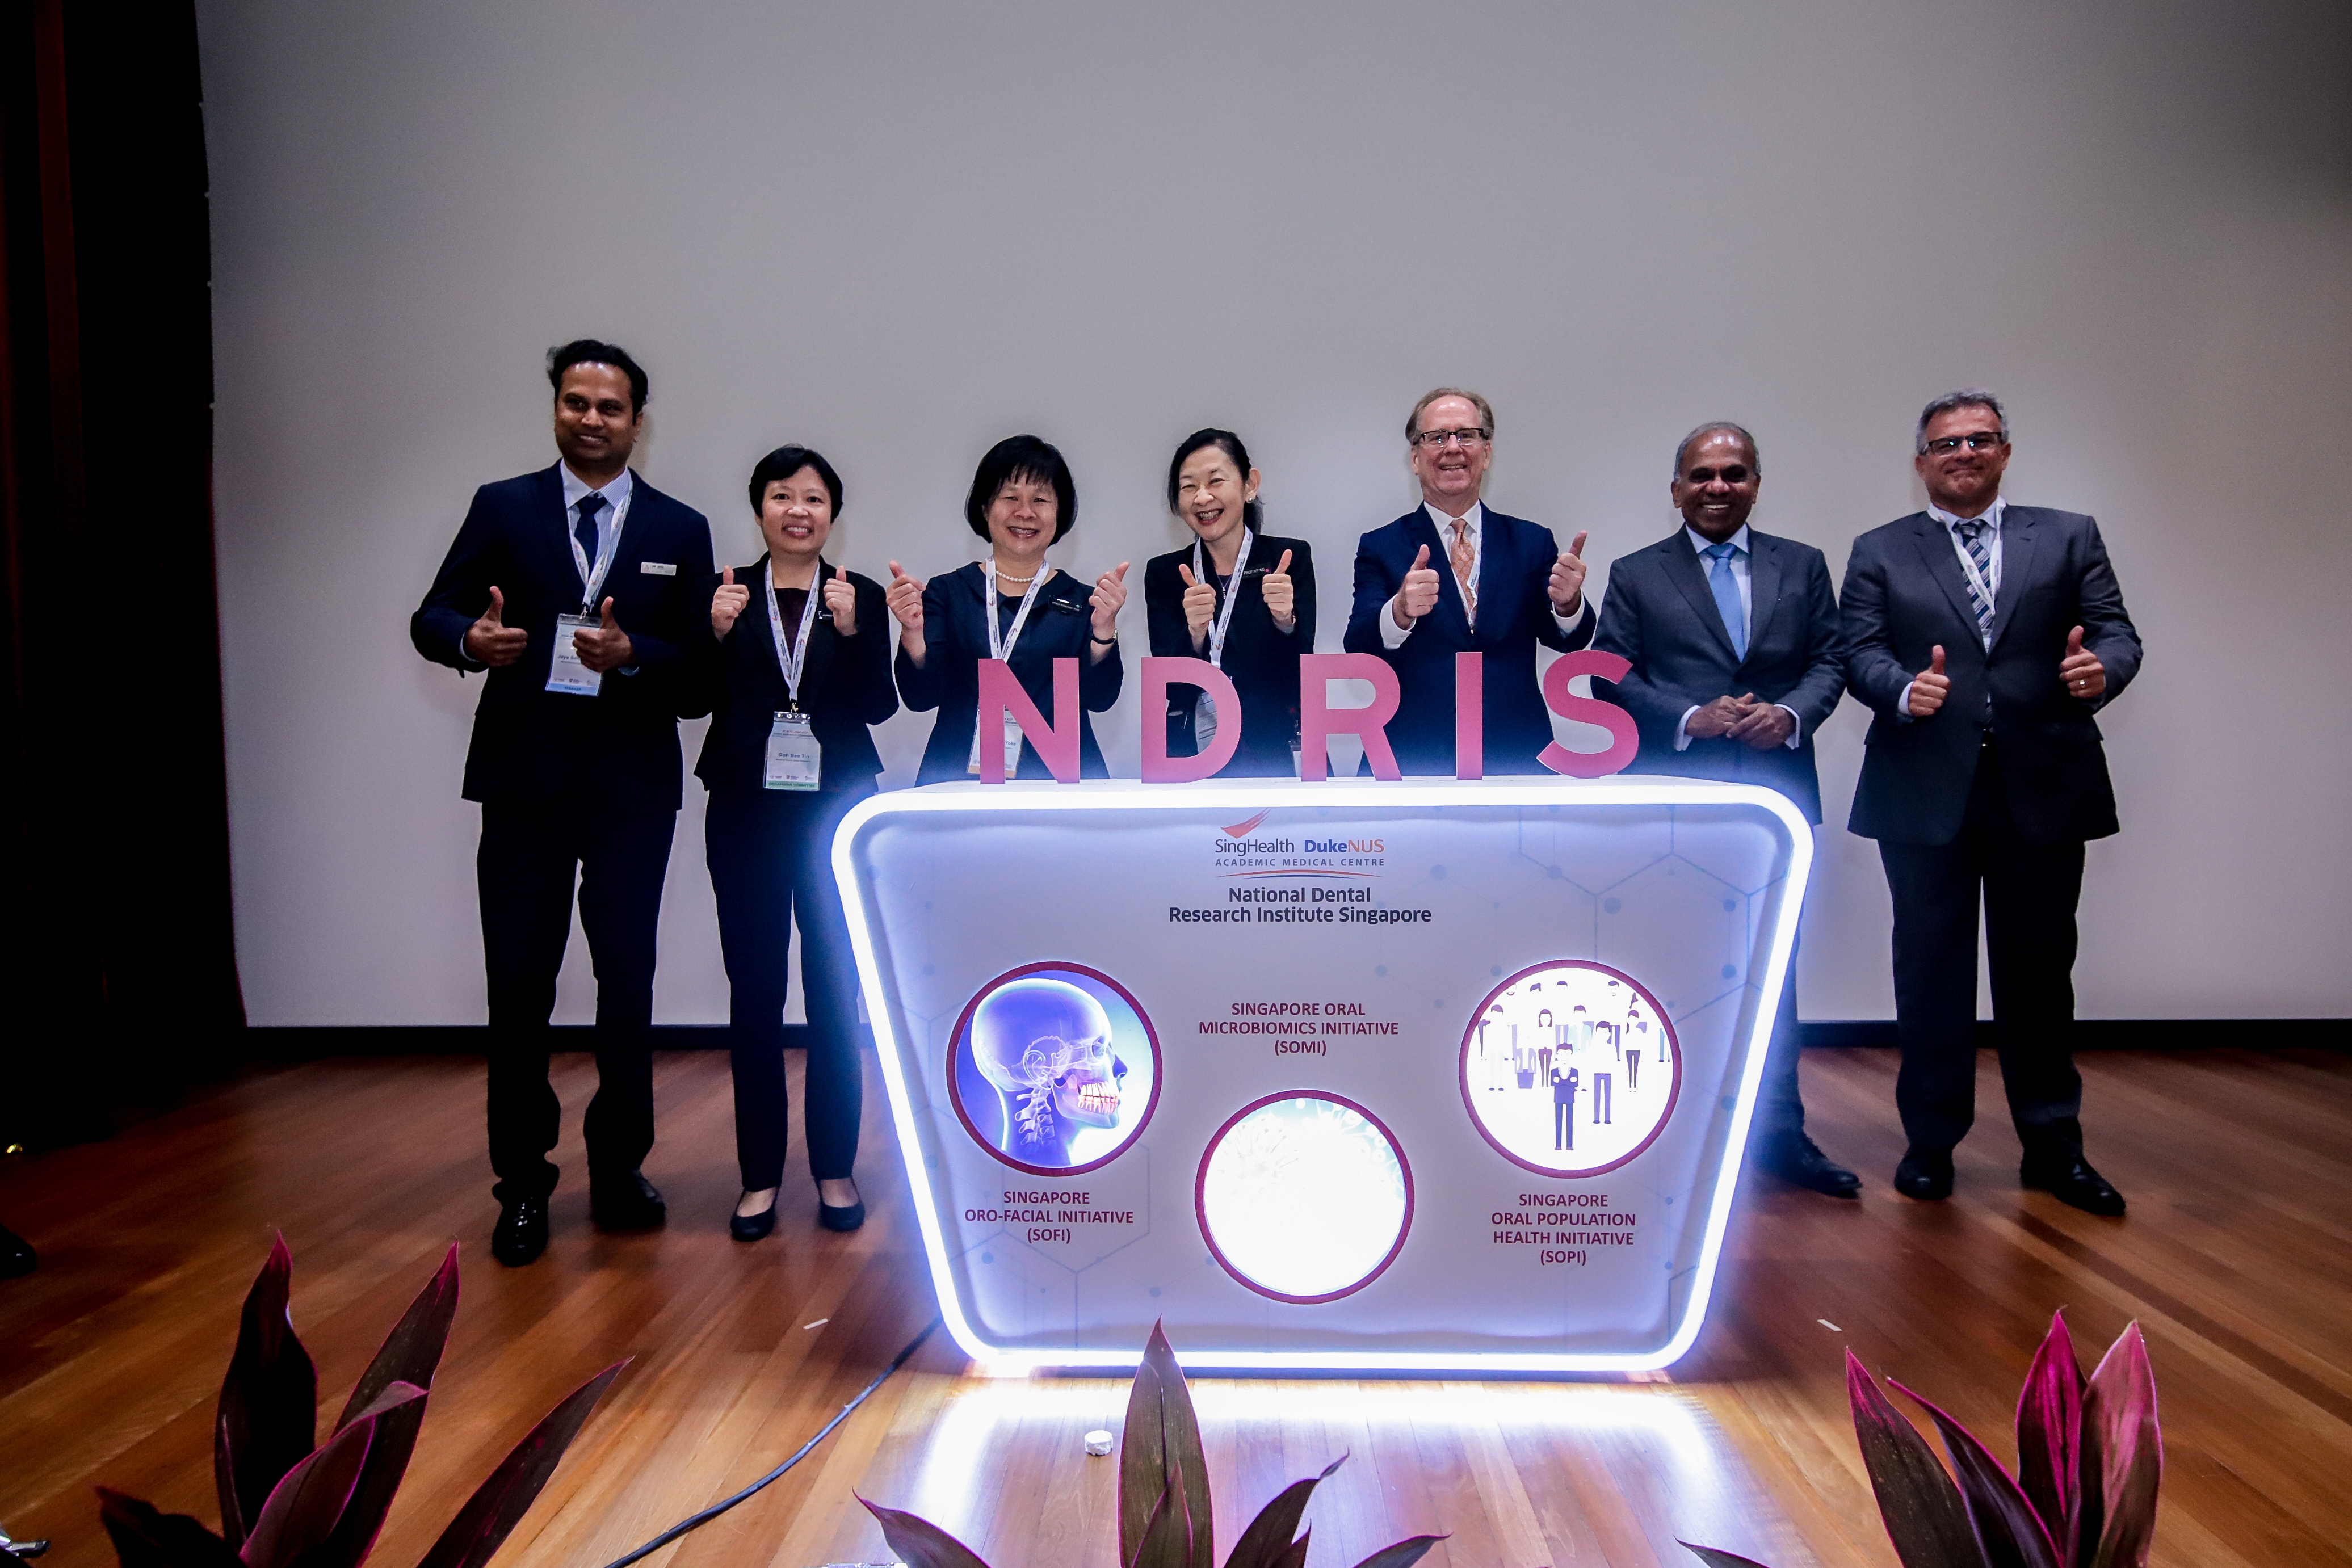 Group picture taken during the launch of the National Dental Research Institute Singapore (NDRIS)